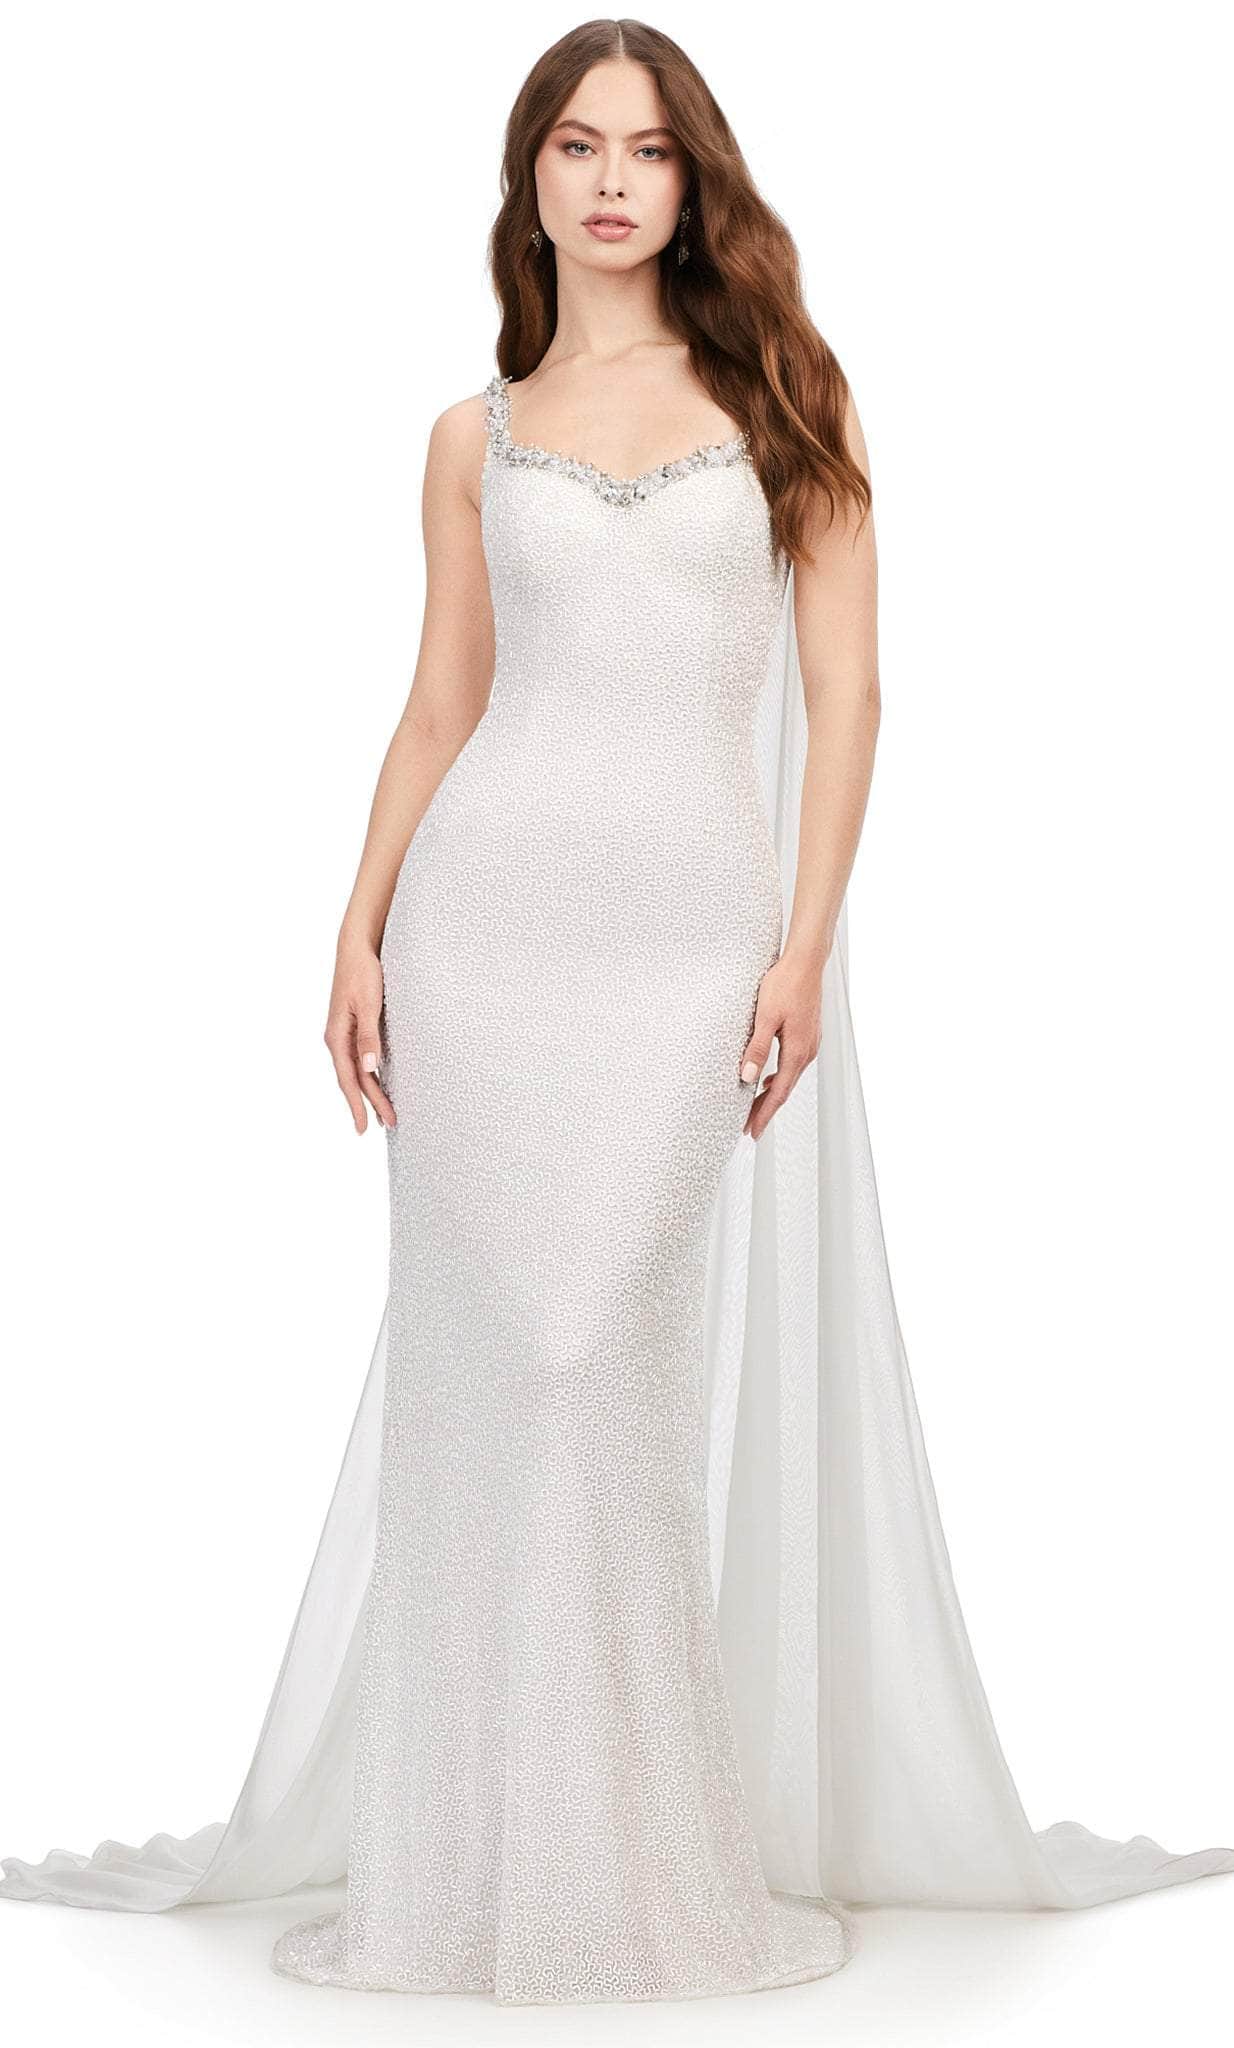 Image of Ashley Lauren 11398 - Vermicelli Beaded Gown with Chiffon Cape